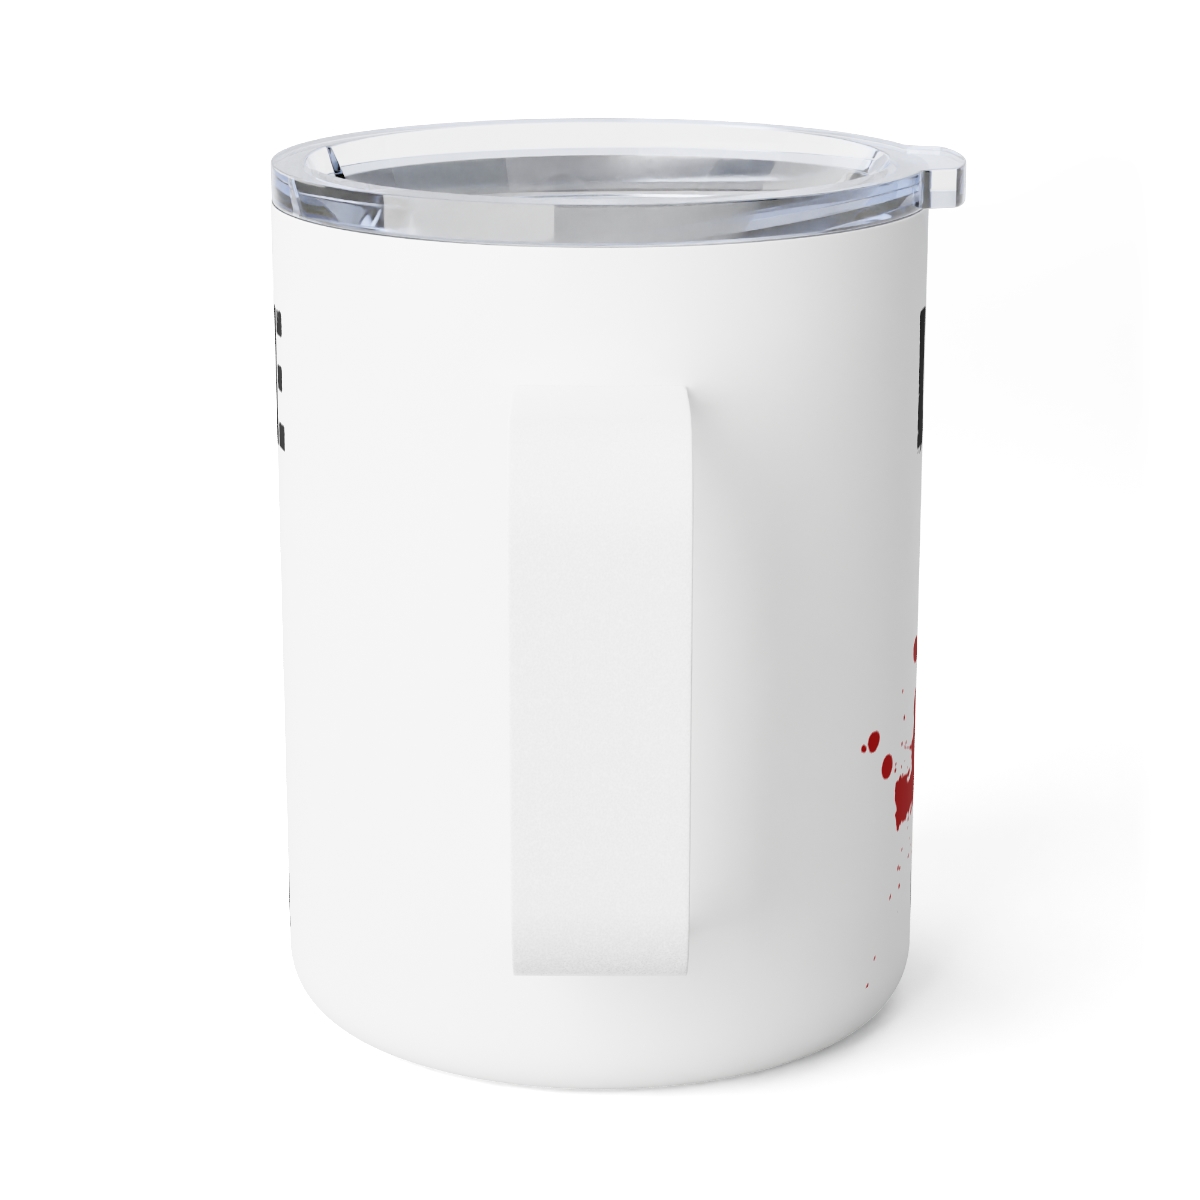 Field Operative of the Month - Insulated Coffee Mug, 10oz  product thumbnail image